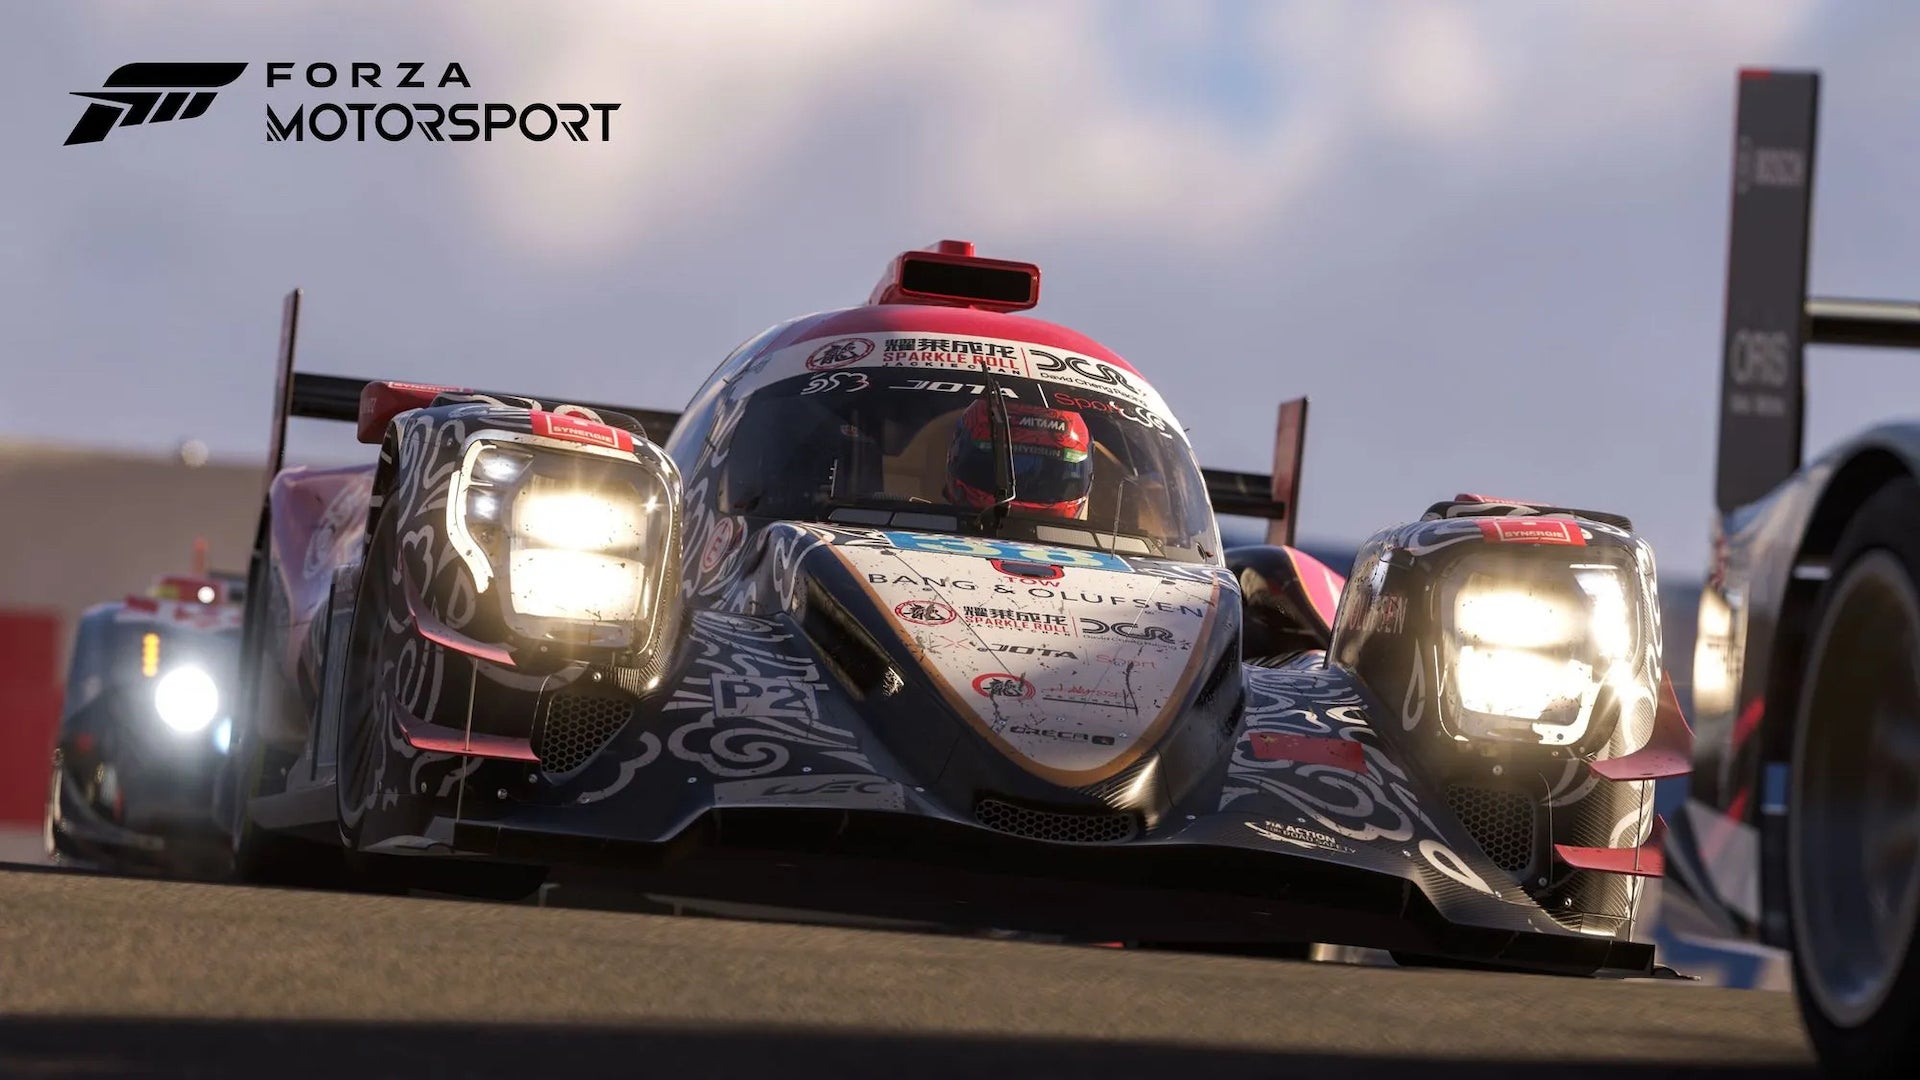 Forza Motorsport Will Launch With Over 500 Cars And 20 Tracks